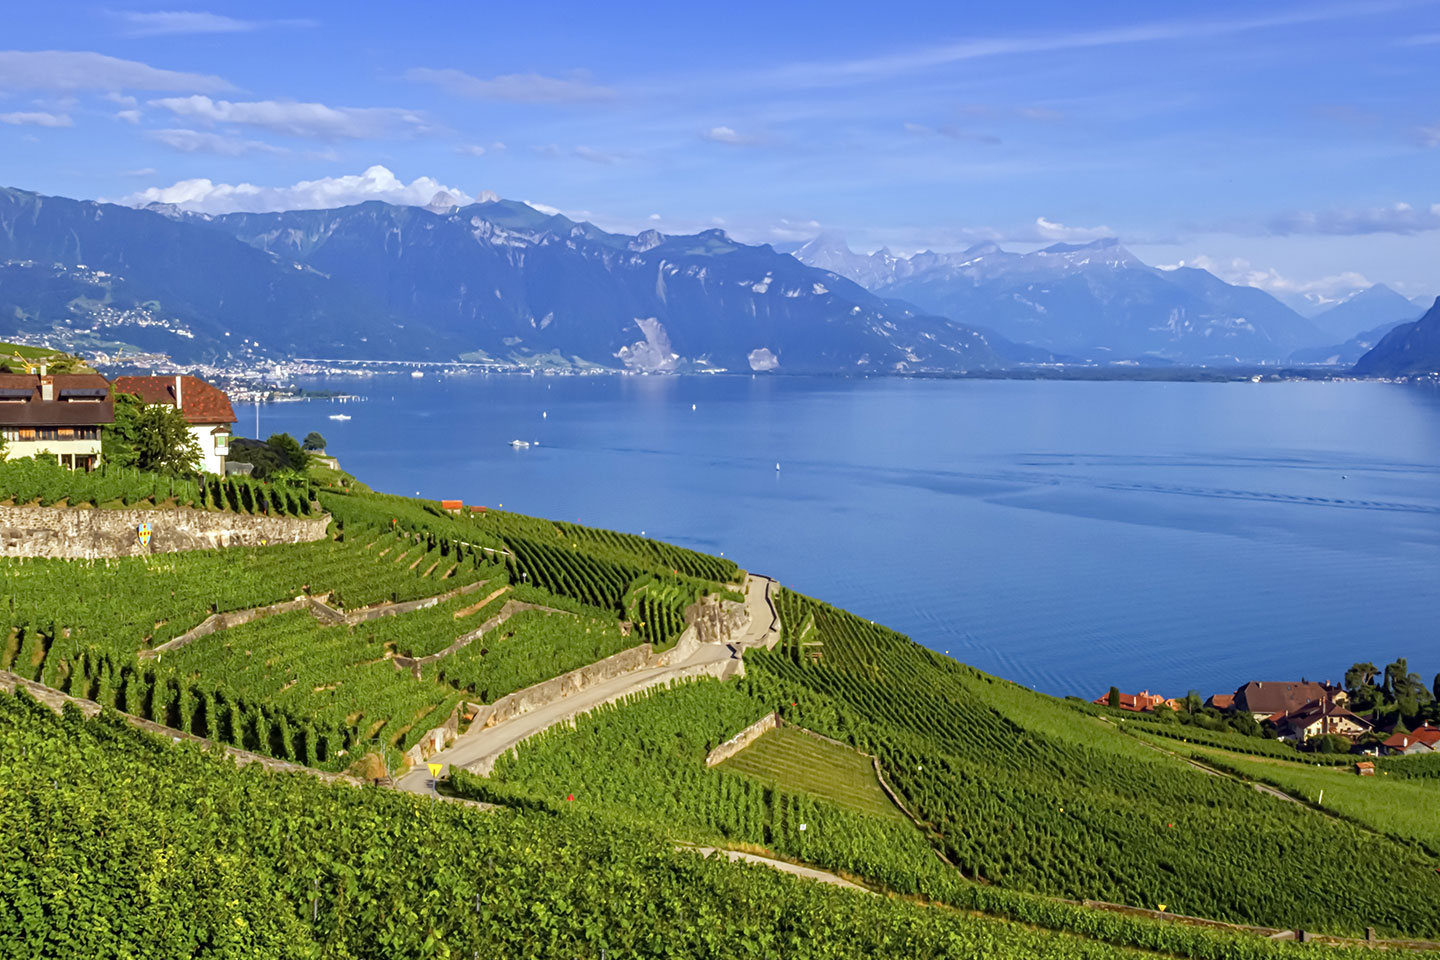 Switzerland's canton of Vaud has it all: Lakes, mountains, wines and Charlie Chaplin